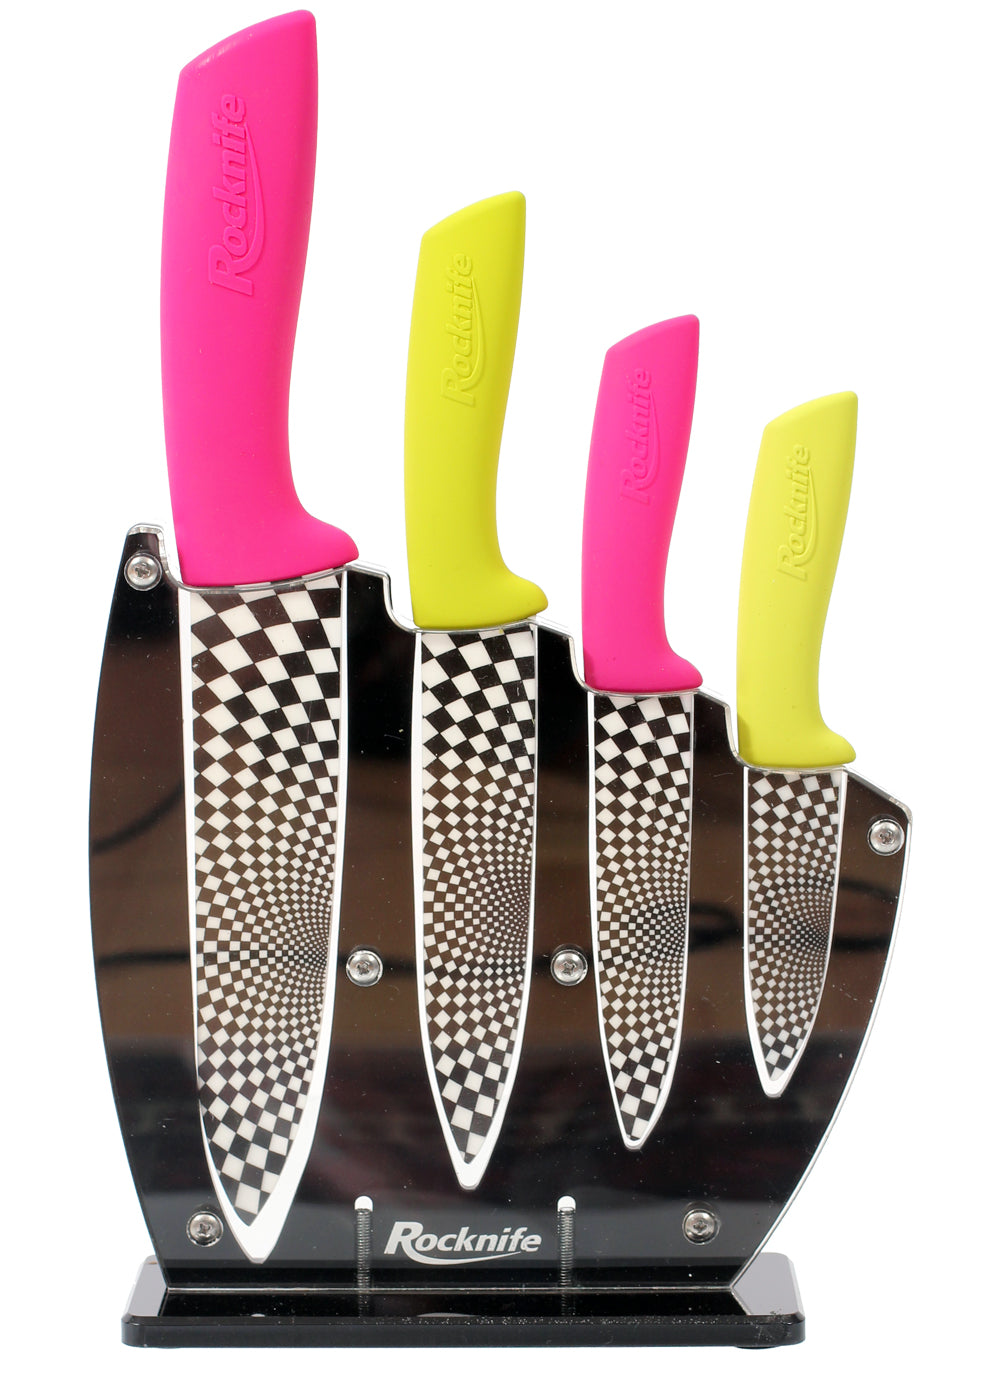 Pink and Green Ceramic Kitchen Knife Sets